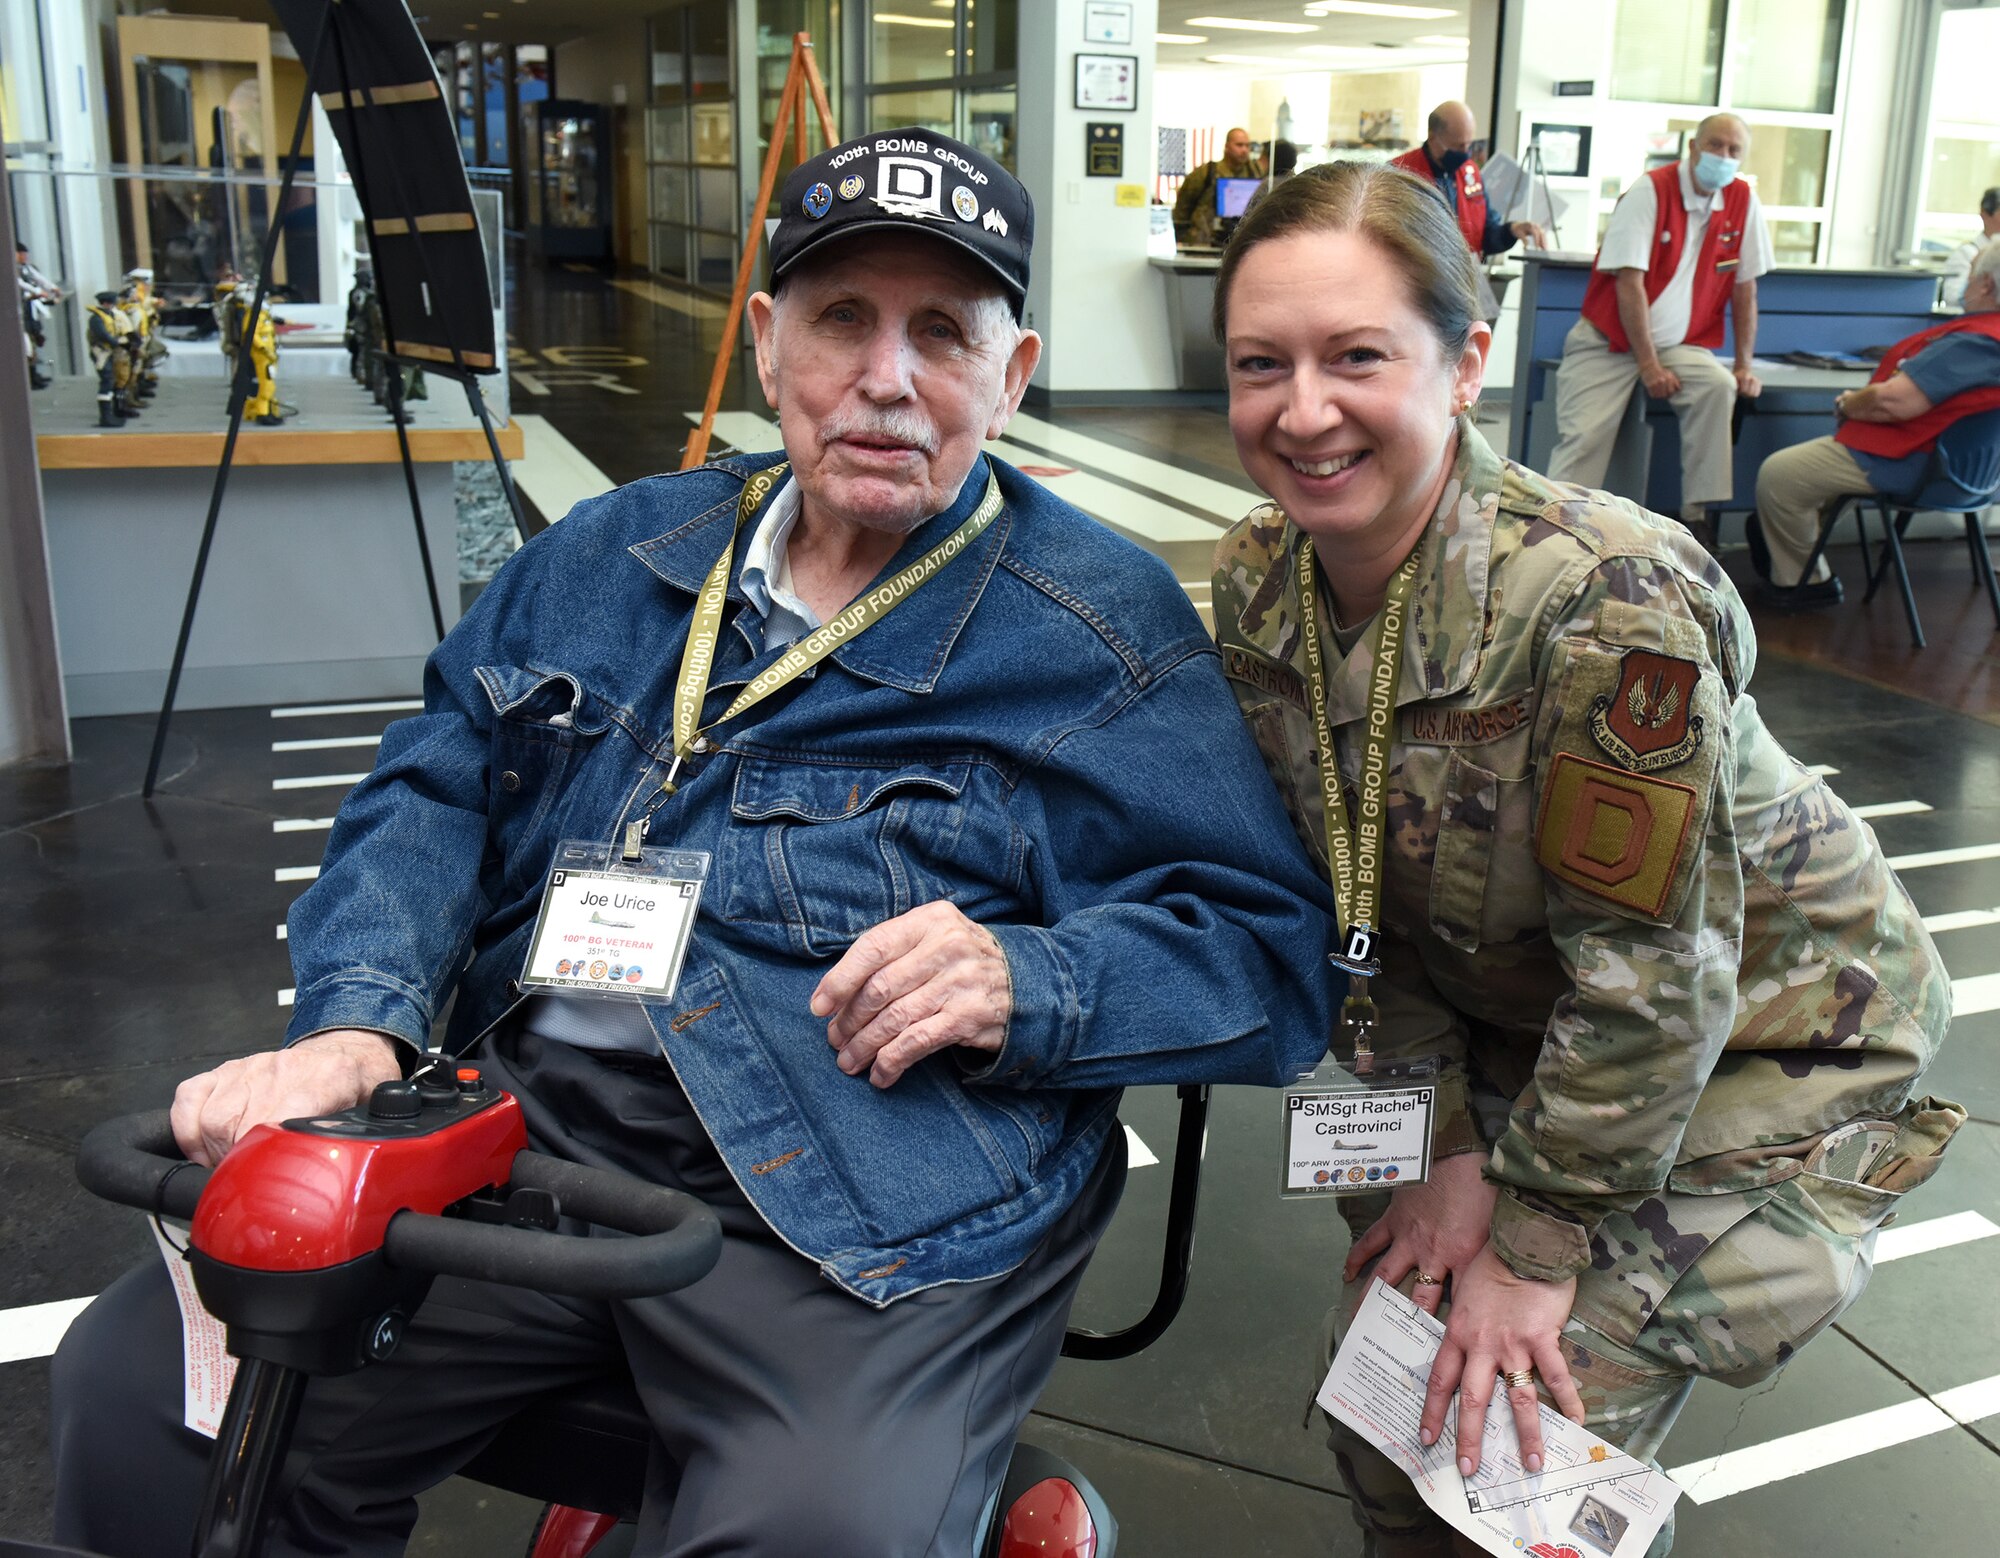 World War II survivor, 100th Bomb Group veteran and B-17 Flying Fortress aircraft tail gunner, retired Staff Sgt. Joe Urice, spends time with Senior Master Sgt. Rachel Castrovinci, 100th Operations Support Squadron senior enlisted leader, at the Frontiers of Flight Museum during the 100th Bomb Group reunion in Dallas, Texas, Oct. 29, 2021. Airmen from the 100th Air Refueling Wing, Royal Air Force Mildenhall, England, attended the reunion and met veterans of the 100th BG and World War II, who were overjoyed to meet those from today's Air Force. (U.S. Air Force photo by Karen Abeyasekere)